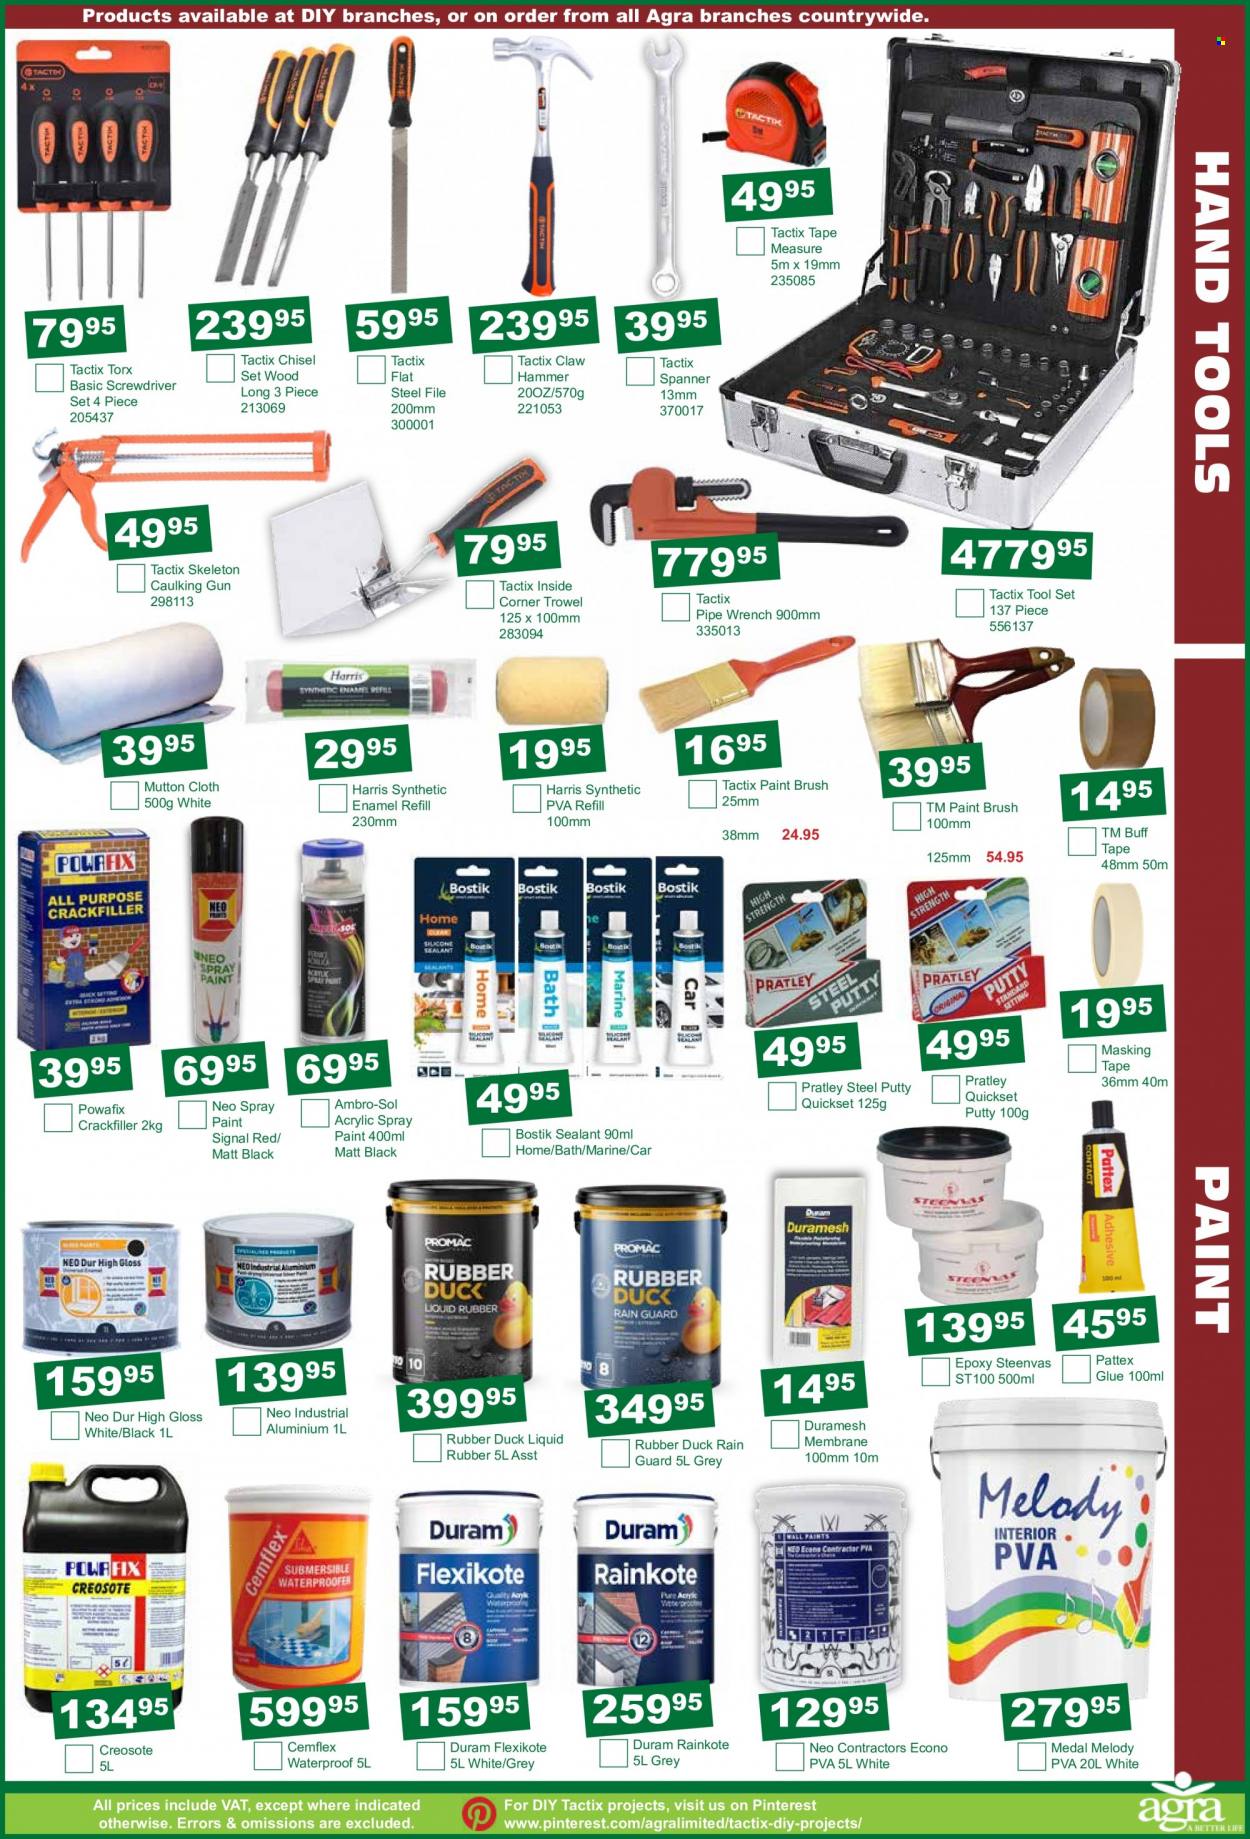 thumbnail - Agra catalogue  - 15/12/2022 - 17/01/2023 - Sales products - paint brush, eraser, glue, masking tape, spray paint, Duram, Medal, screwdriver, hammer, wrench, spanner, tool set, claw hammer, screwdriver set, hand tools, measuring tape, gun. Page 11.